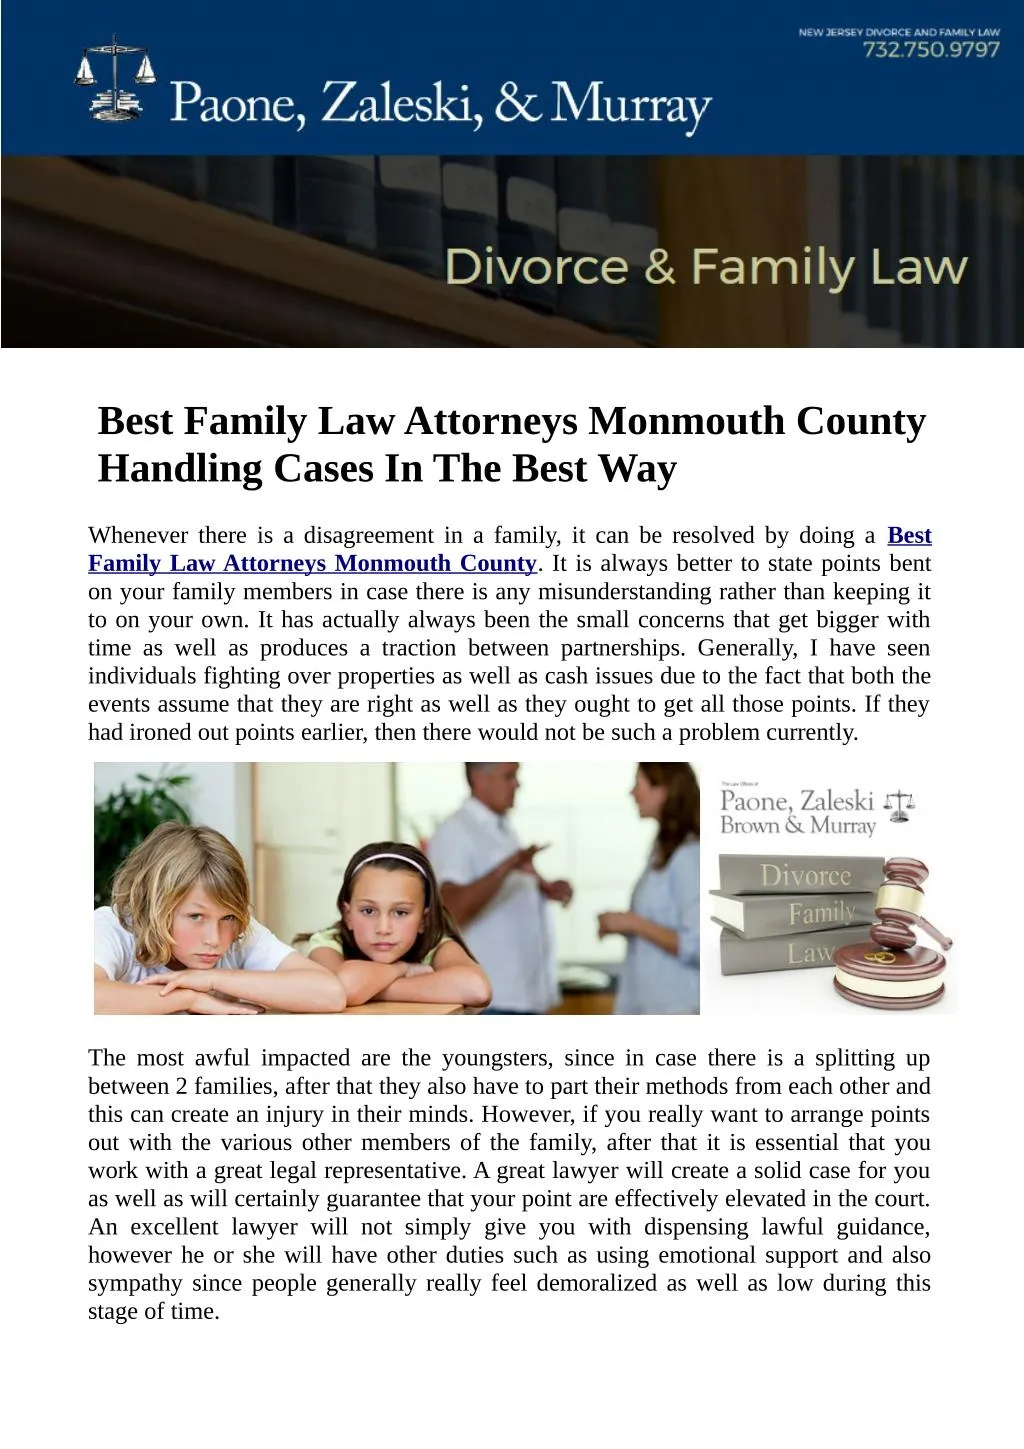 best family law attorneys monmouth county